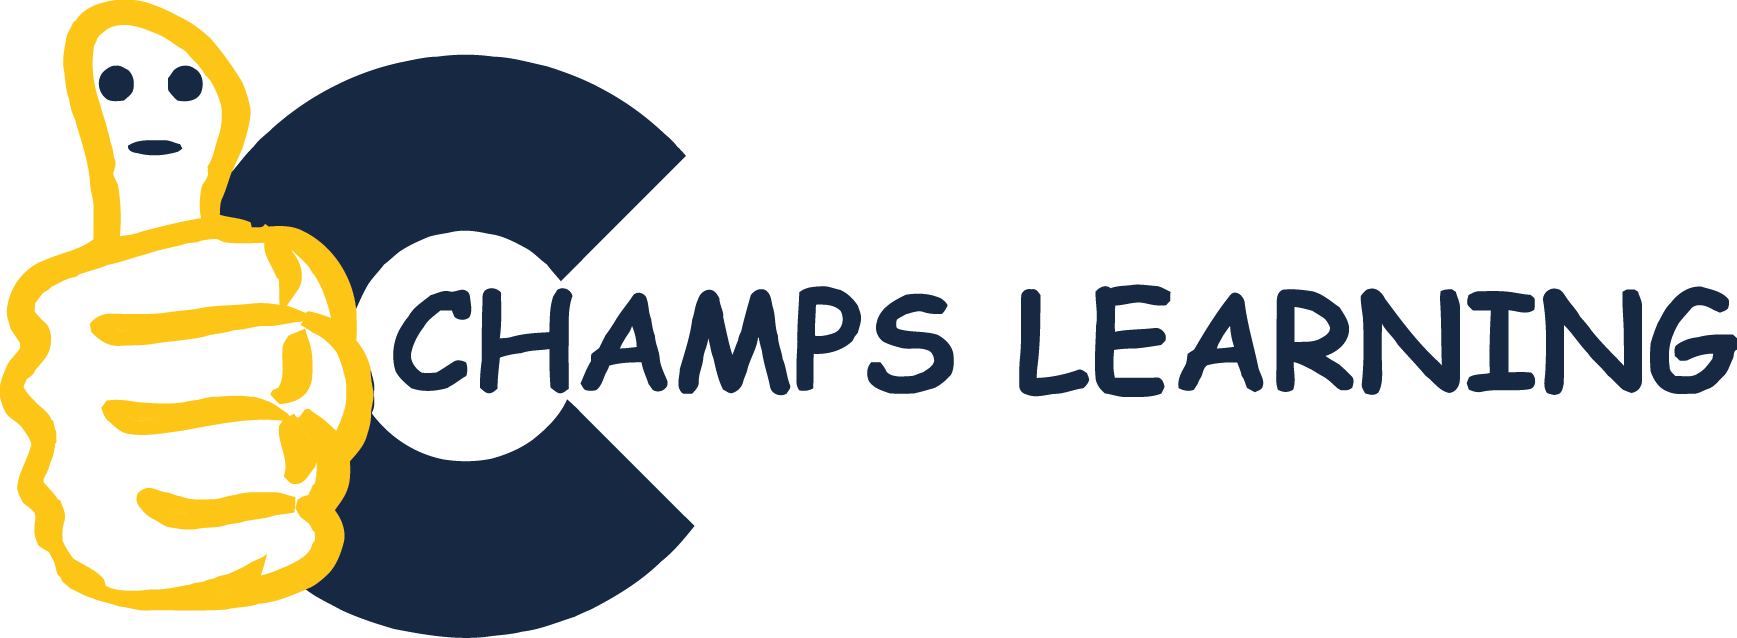 Champs logo linking to website